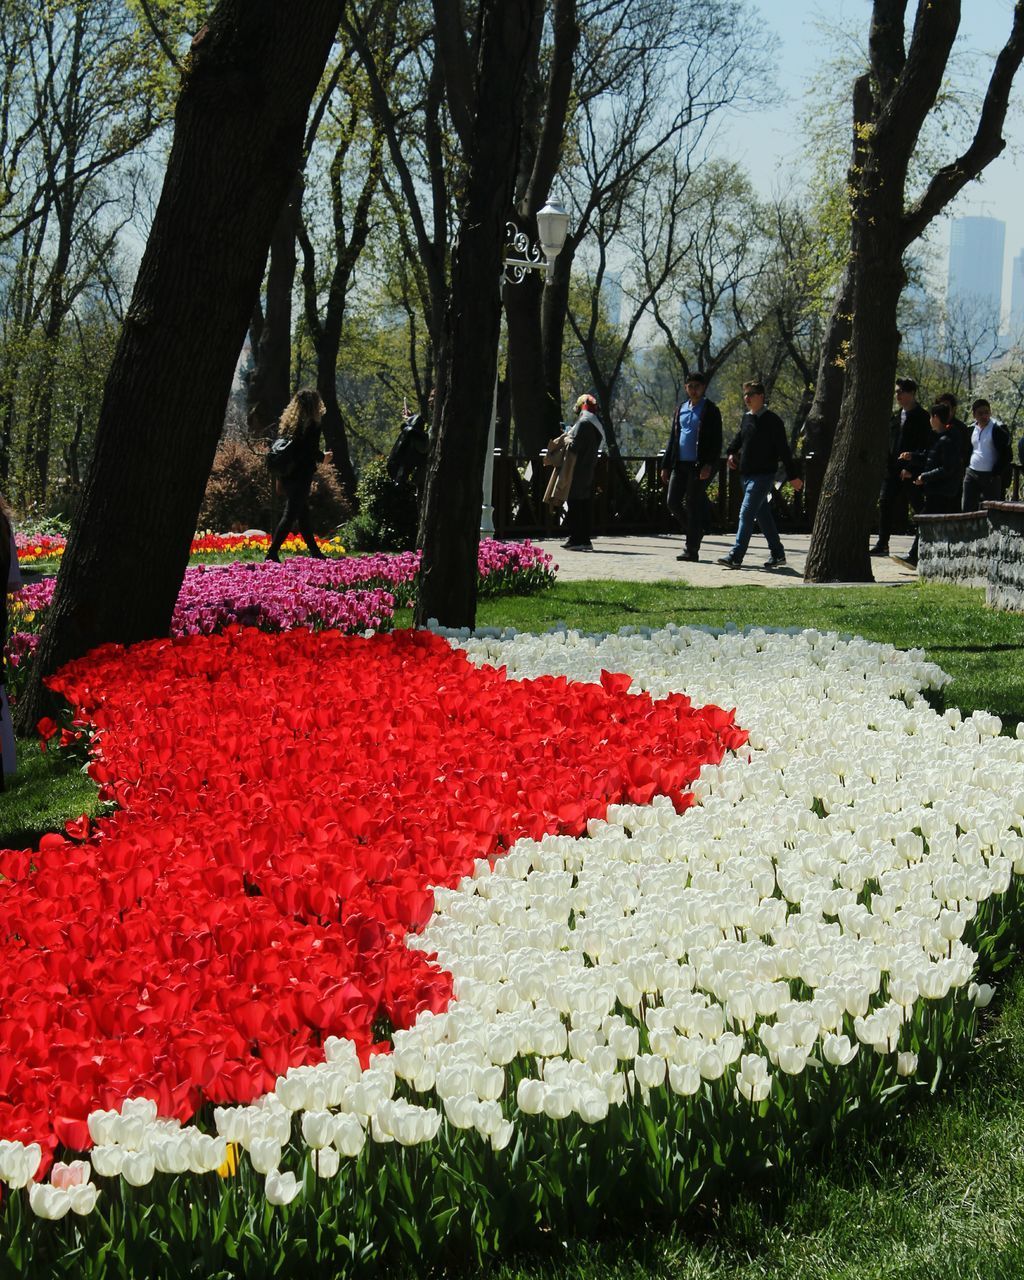 VIEW OF RED FLOWERING PLANT IN PARK